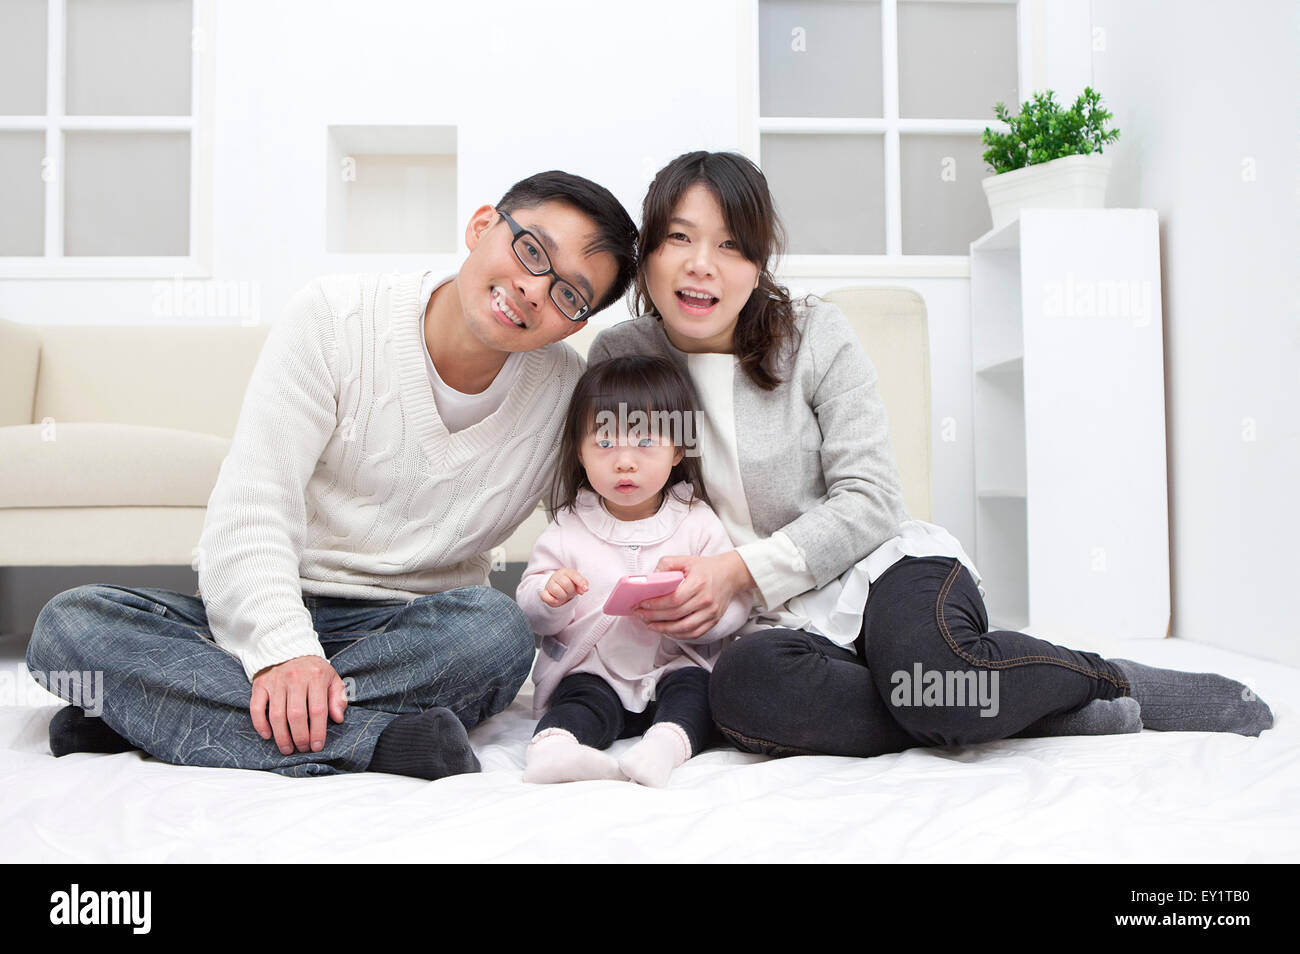 Family with one child sitting and smiling at the camera together, Stock Photo